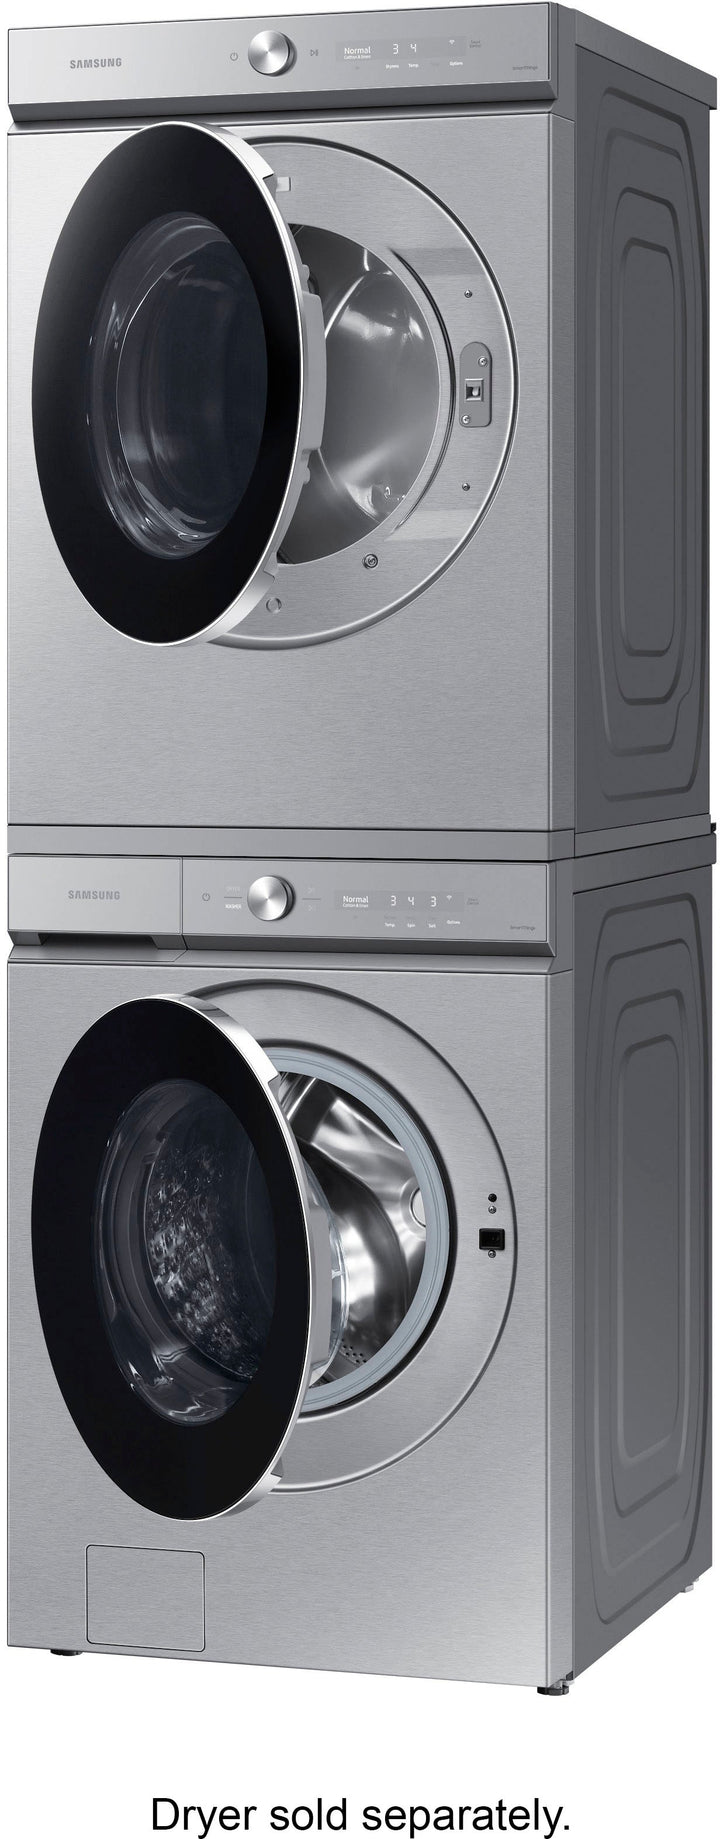 Samsung - Bespoke 5.3 cu. ft. Ultra Capacity Front Load Washer with AI OptiWash and Auto Dispense - Silver steel_8